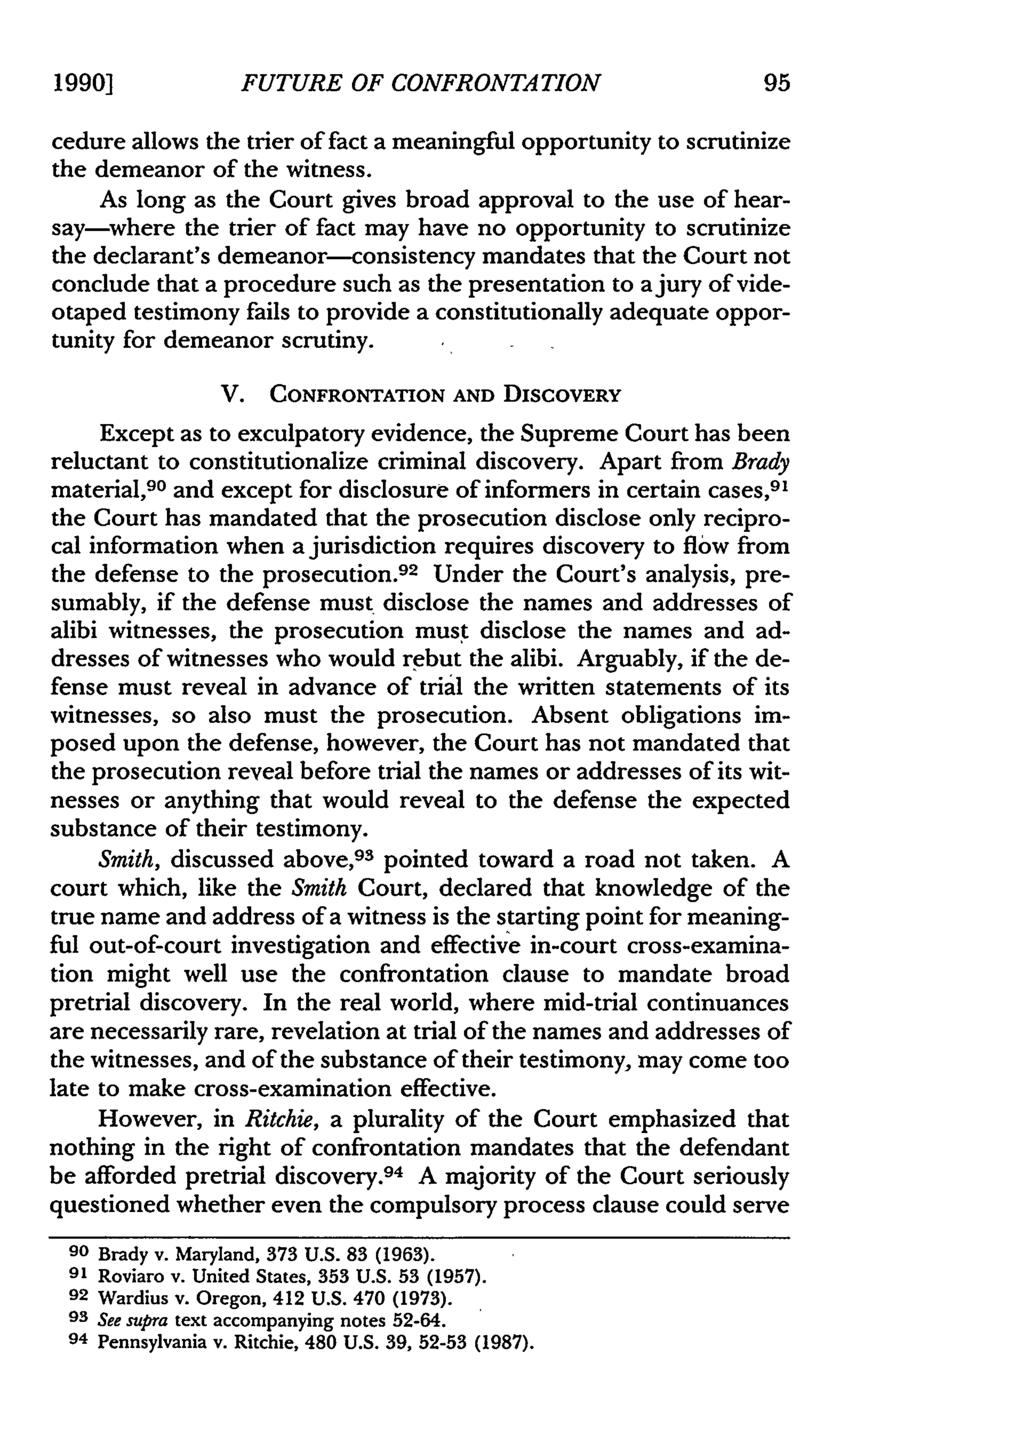 1990] FUTURE OF CONFRONTATION cedure allows the trier of fact a meaningful opportunity to scrutinize the demeanor of the witness.